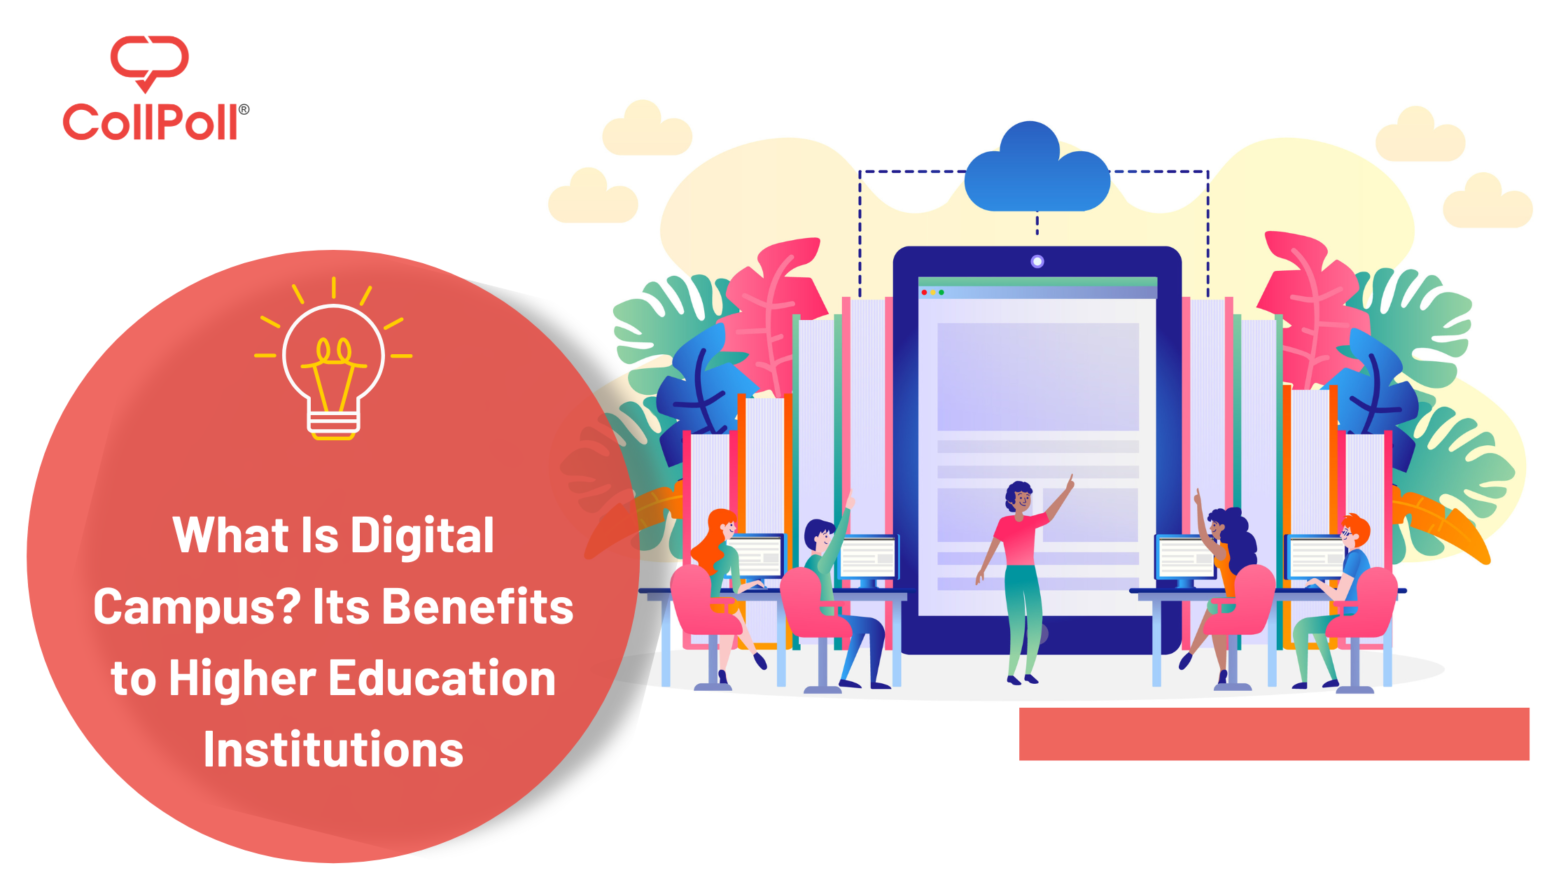 What Is Digital Campus? Its Benefits to Higher Education Institutions